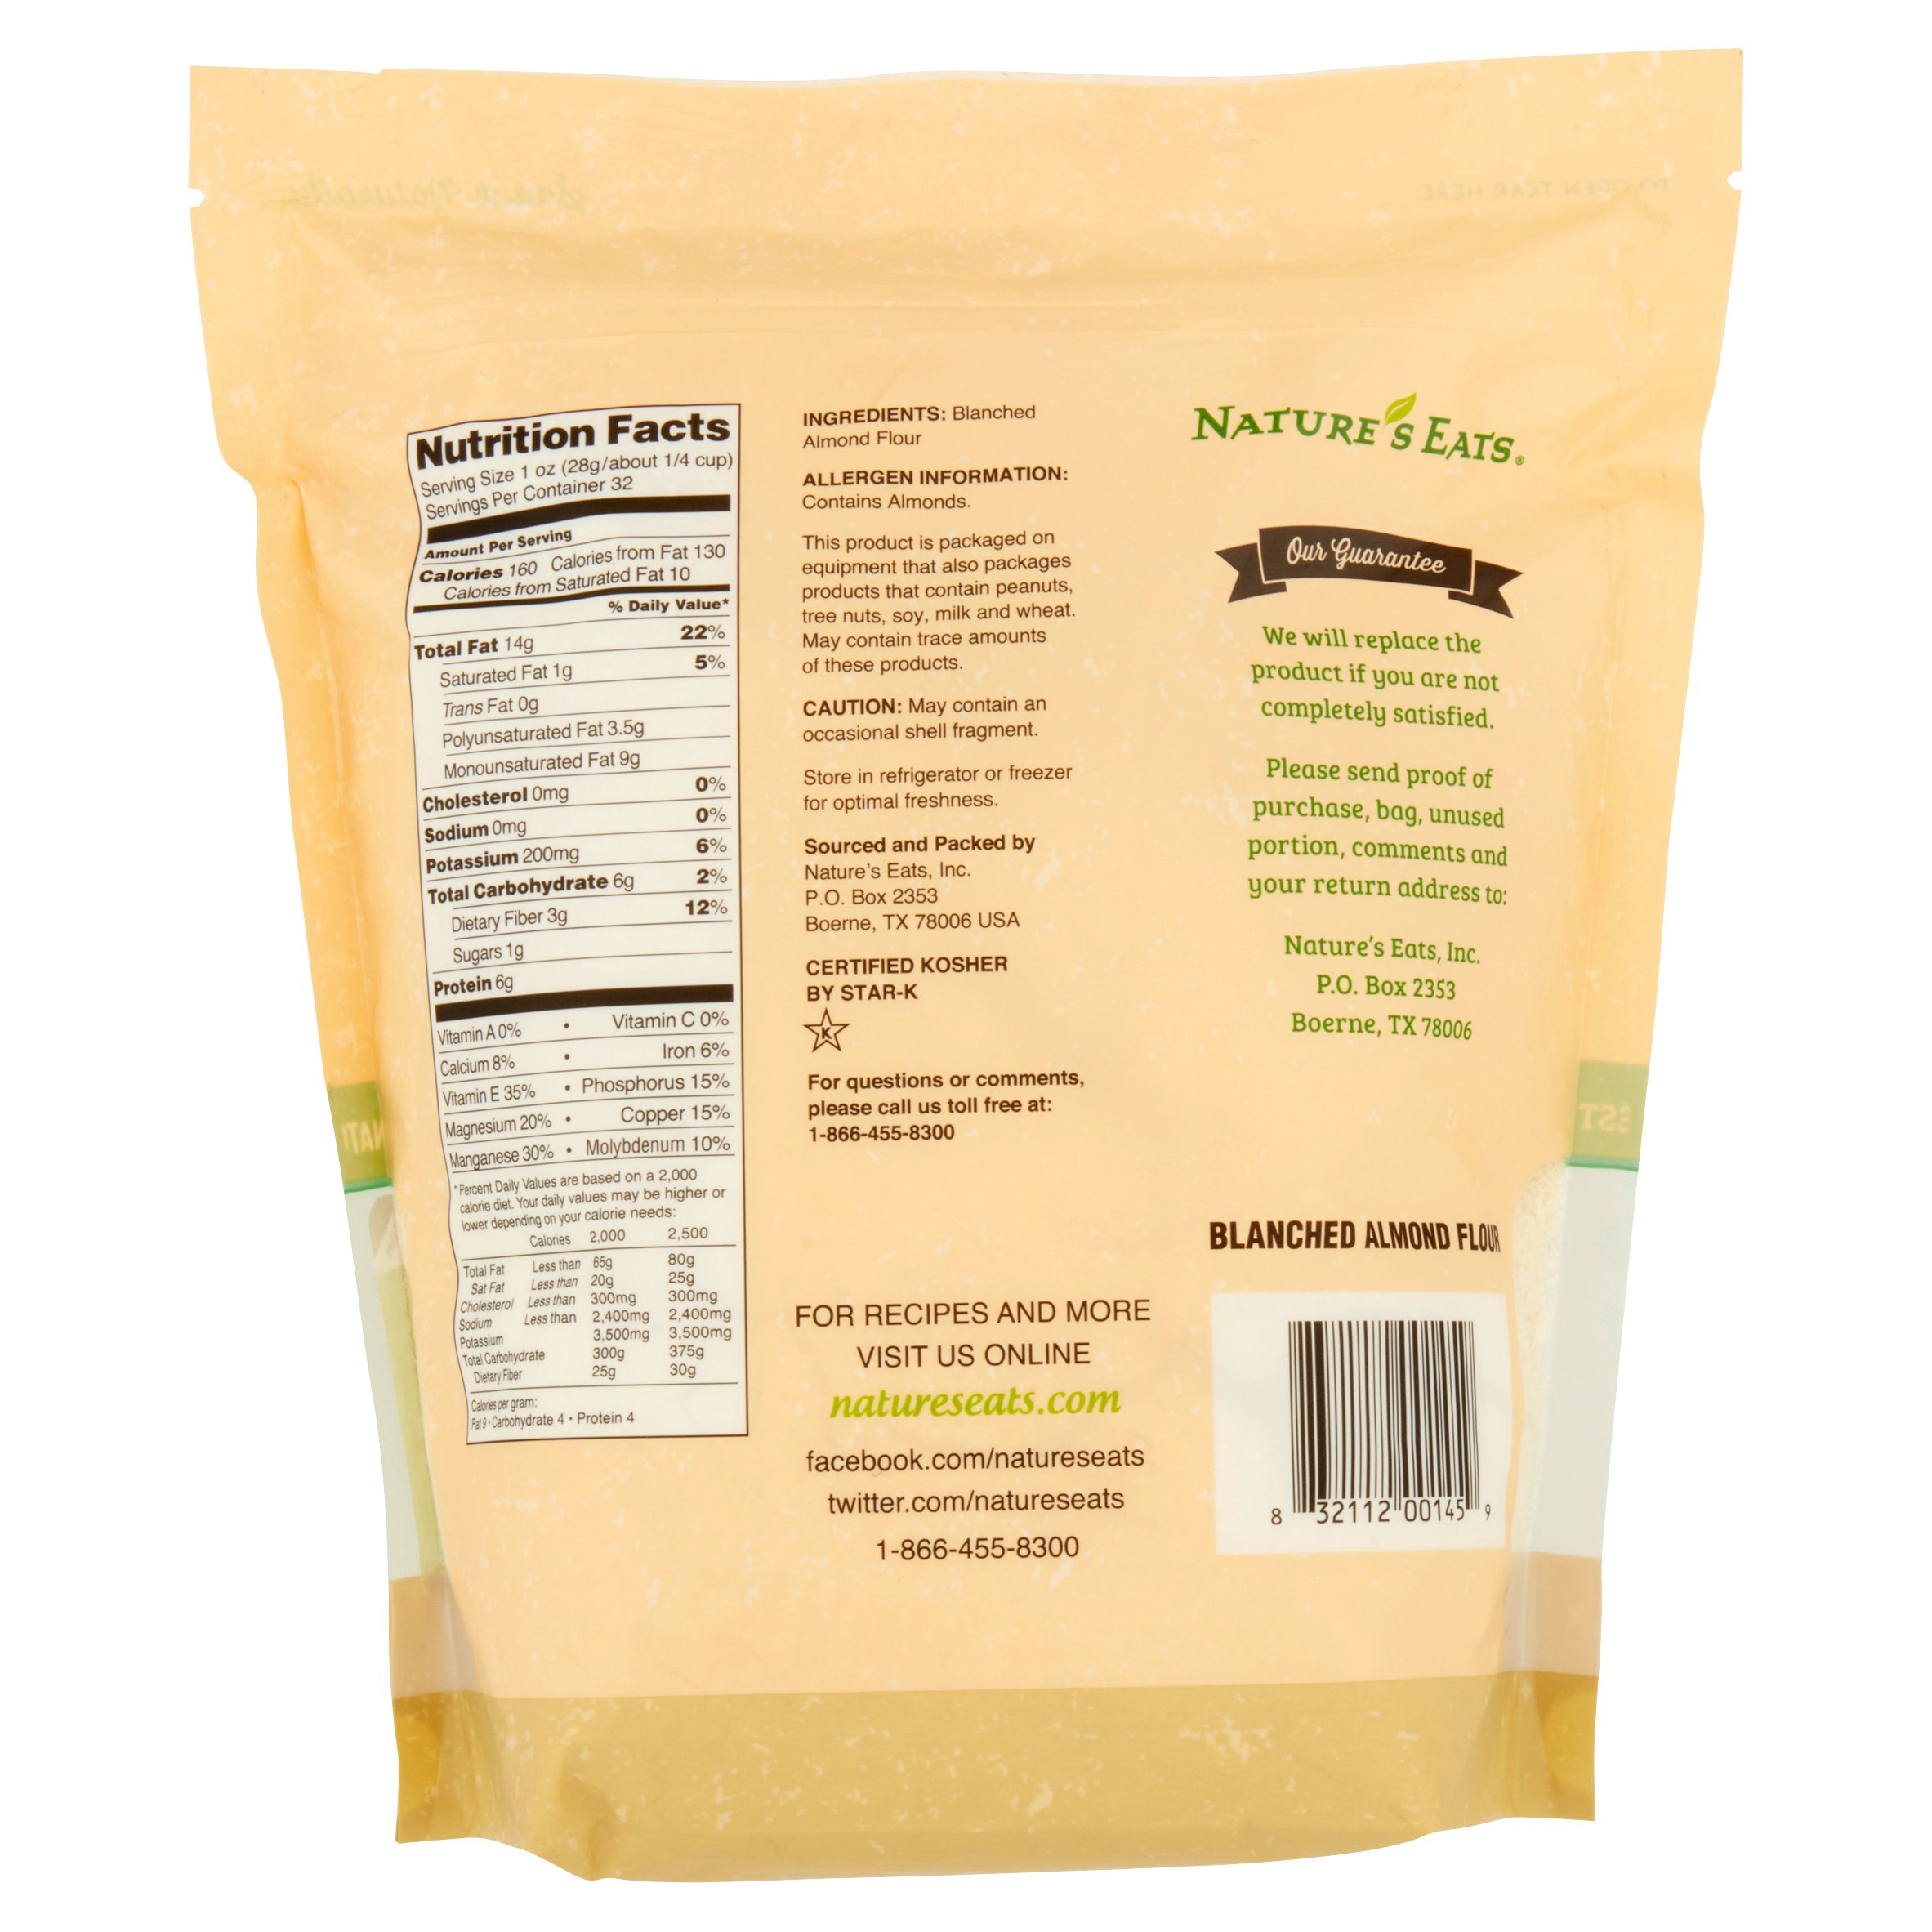 Nature's Eats Blanched Almond Flour, 32 oz - image 2 of 8